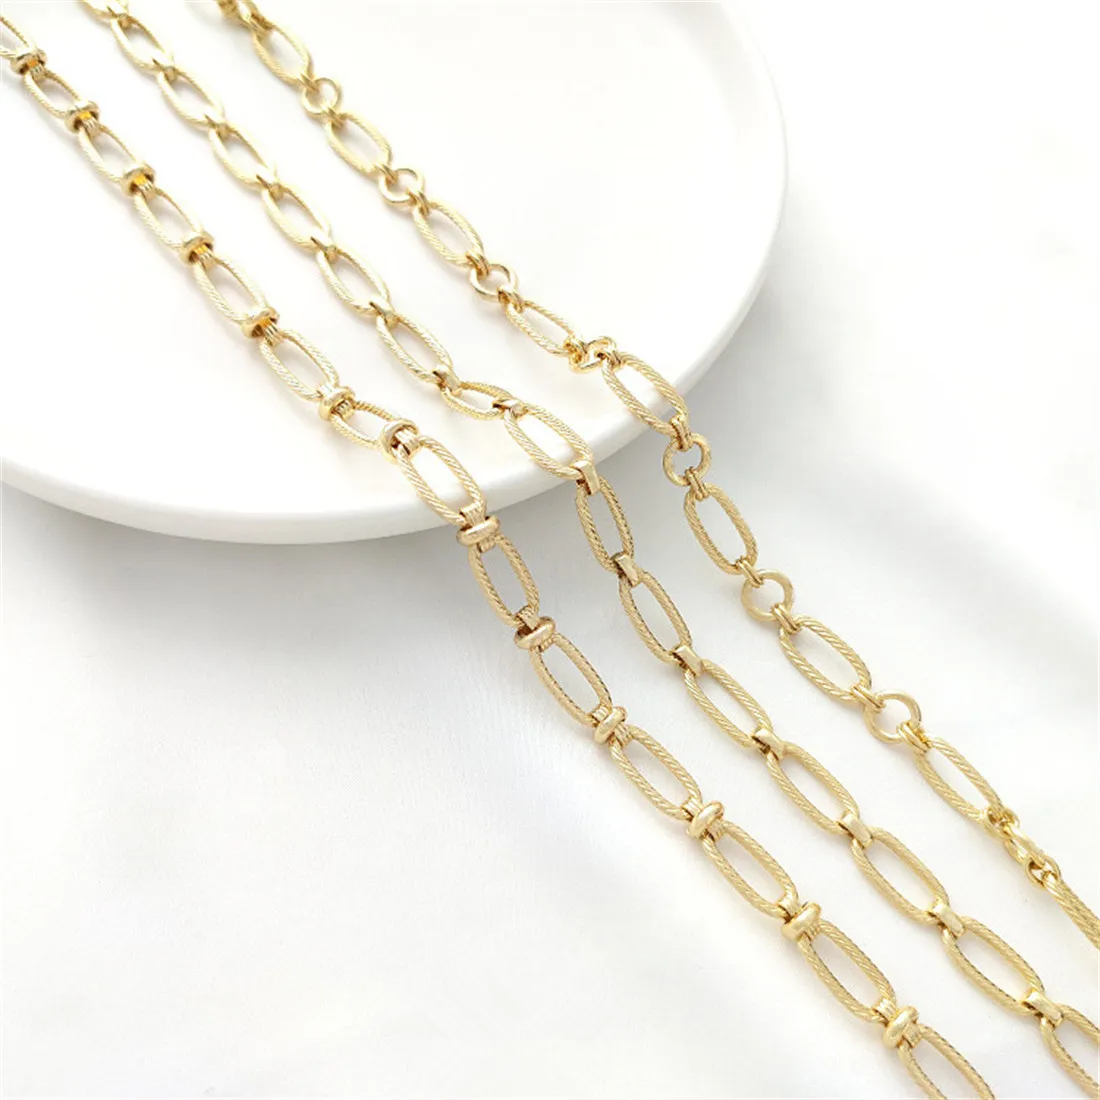 14K Gold Wrapped Oval Fried Dough Twists Chain Manual Long O-ring Chain Diy Bracelet Necklace Jewelry Hand Made Loose Chain B671 acmecn new fountain pen classic china elements stationery collection liquid ink pen hand made antique emboss horse fountain pen